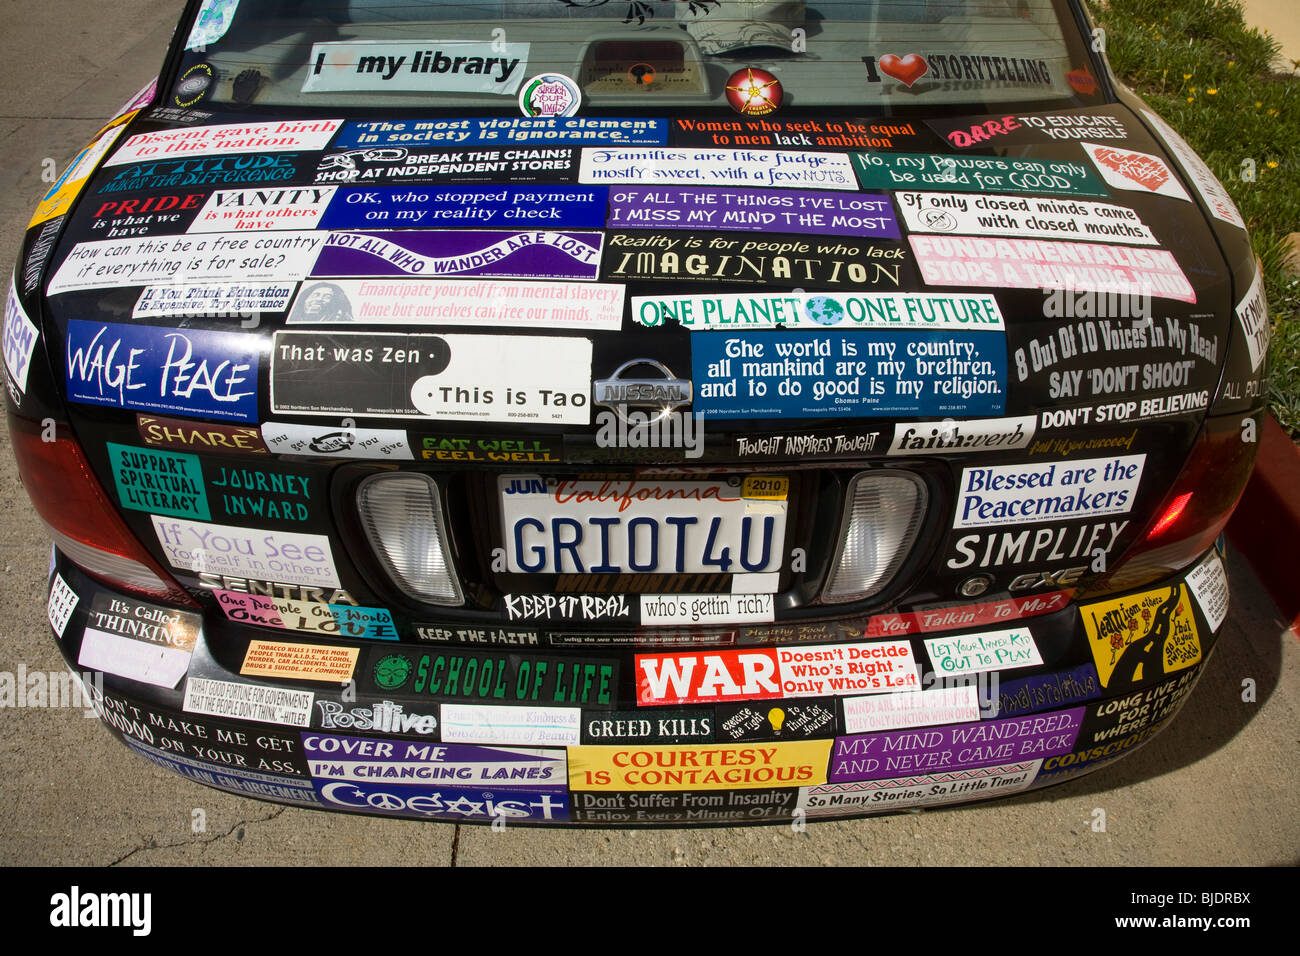 a-car-covered-with-bumper-stickers-inglewood-los-angeles-county-california-BJDRBX.jpg